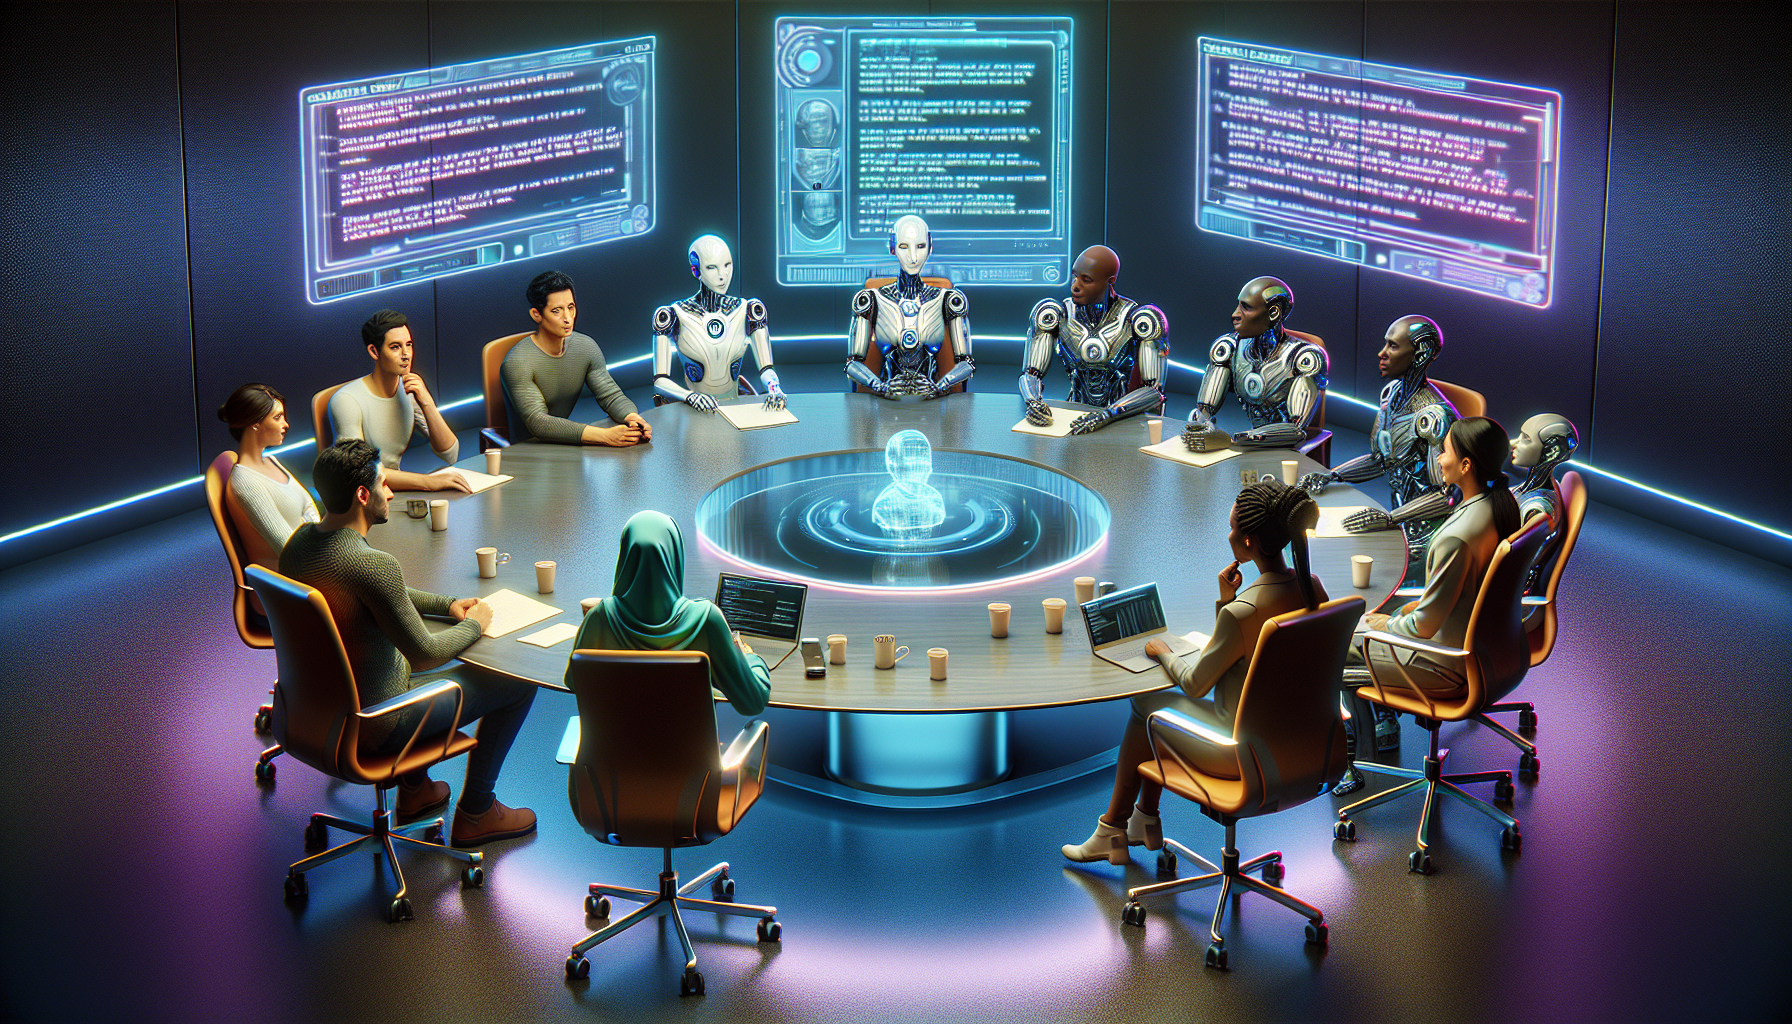 A futuristic conference room with a round table discussion involving diverse human screenwriters and anthropomorphic AI robots considering a holographic display of a script, emphasizing thoughtful exp